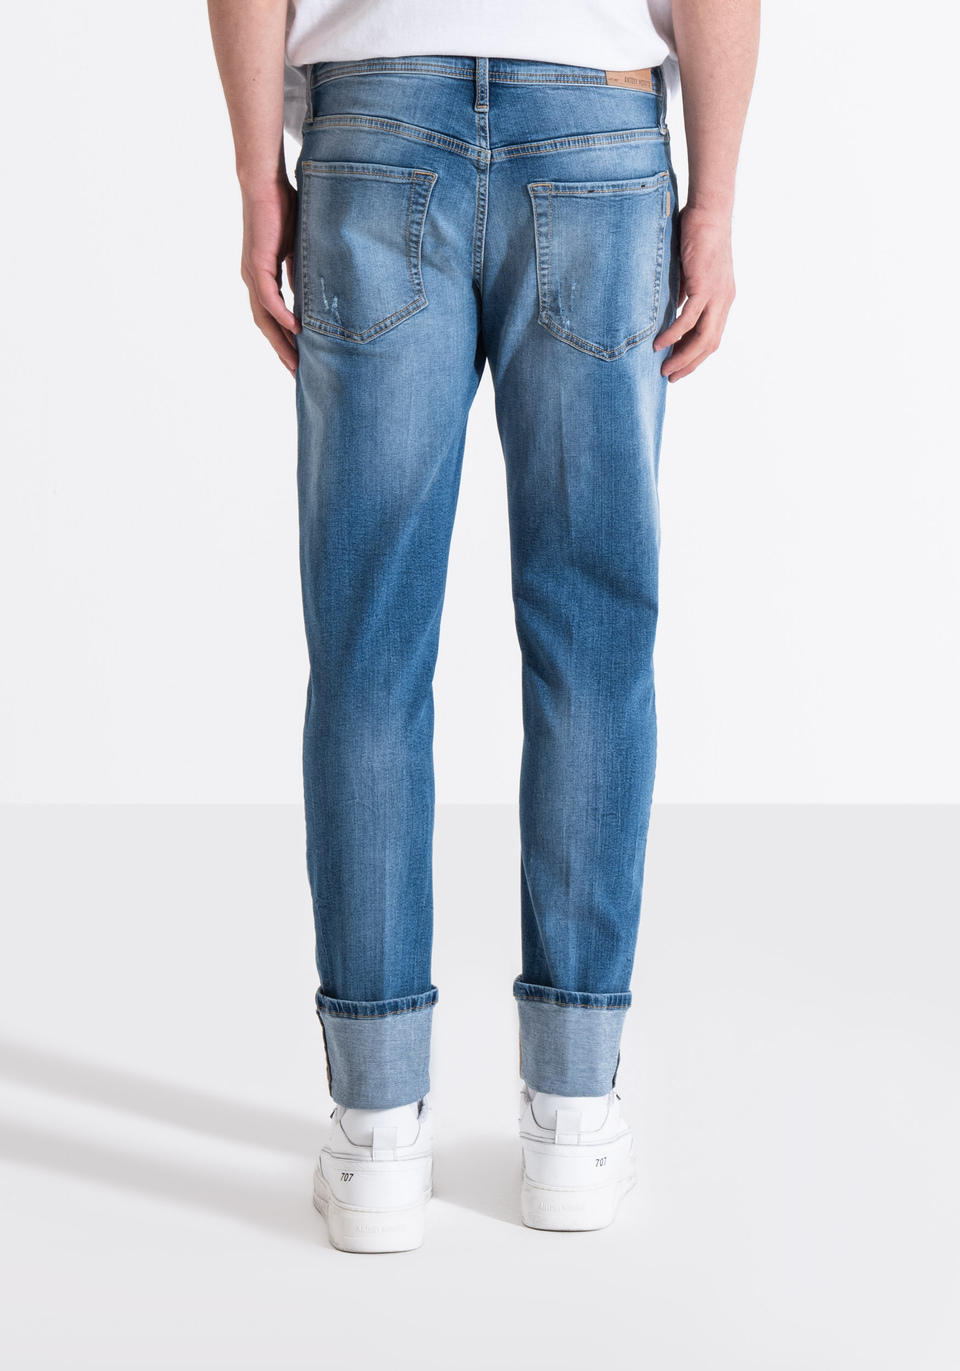 SUPER SKINNY FIT "PAUL" JEANS IN STRETCH DENIM WITH LAPELS - Antony Morato Online Shop